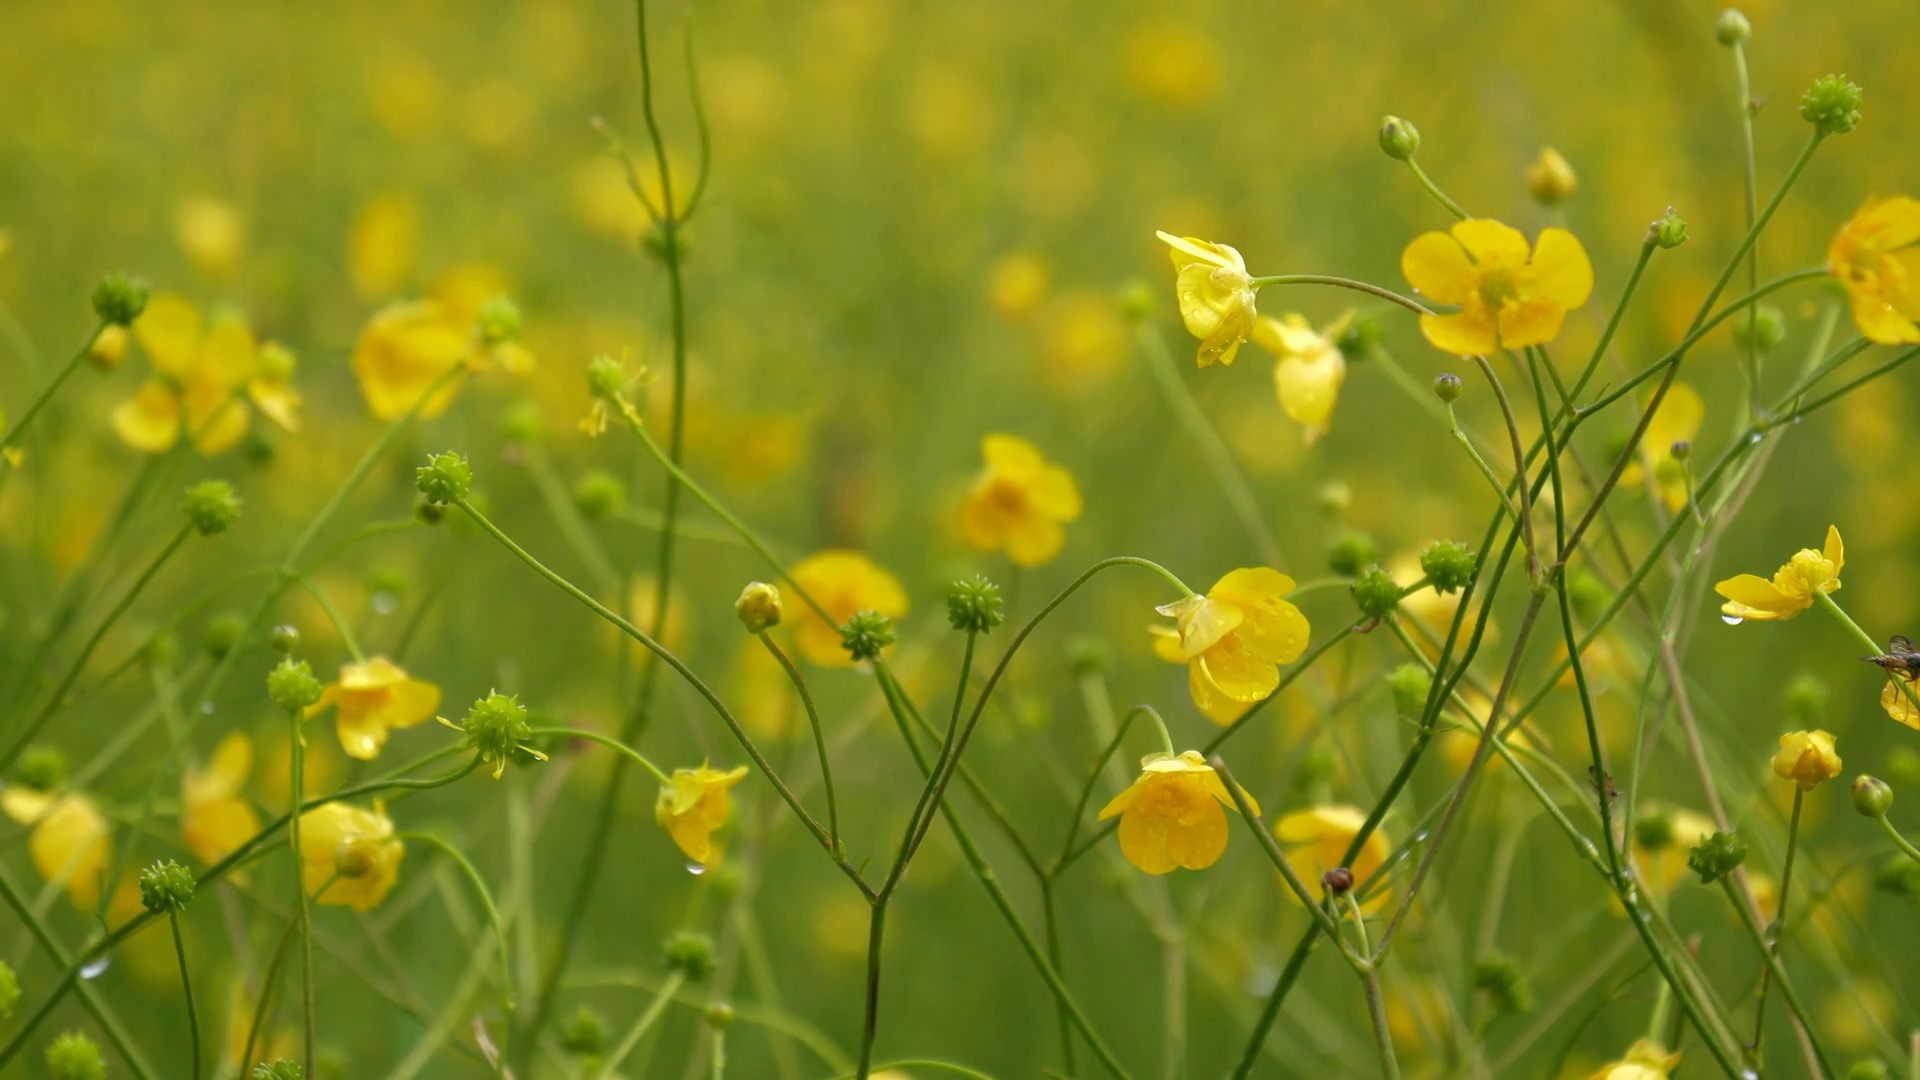 Yellow Meadow Buttercup flowers from the family Ranunculus in a ...